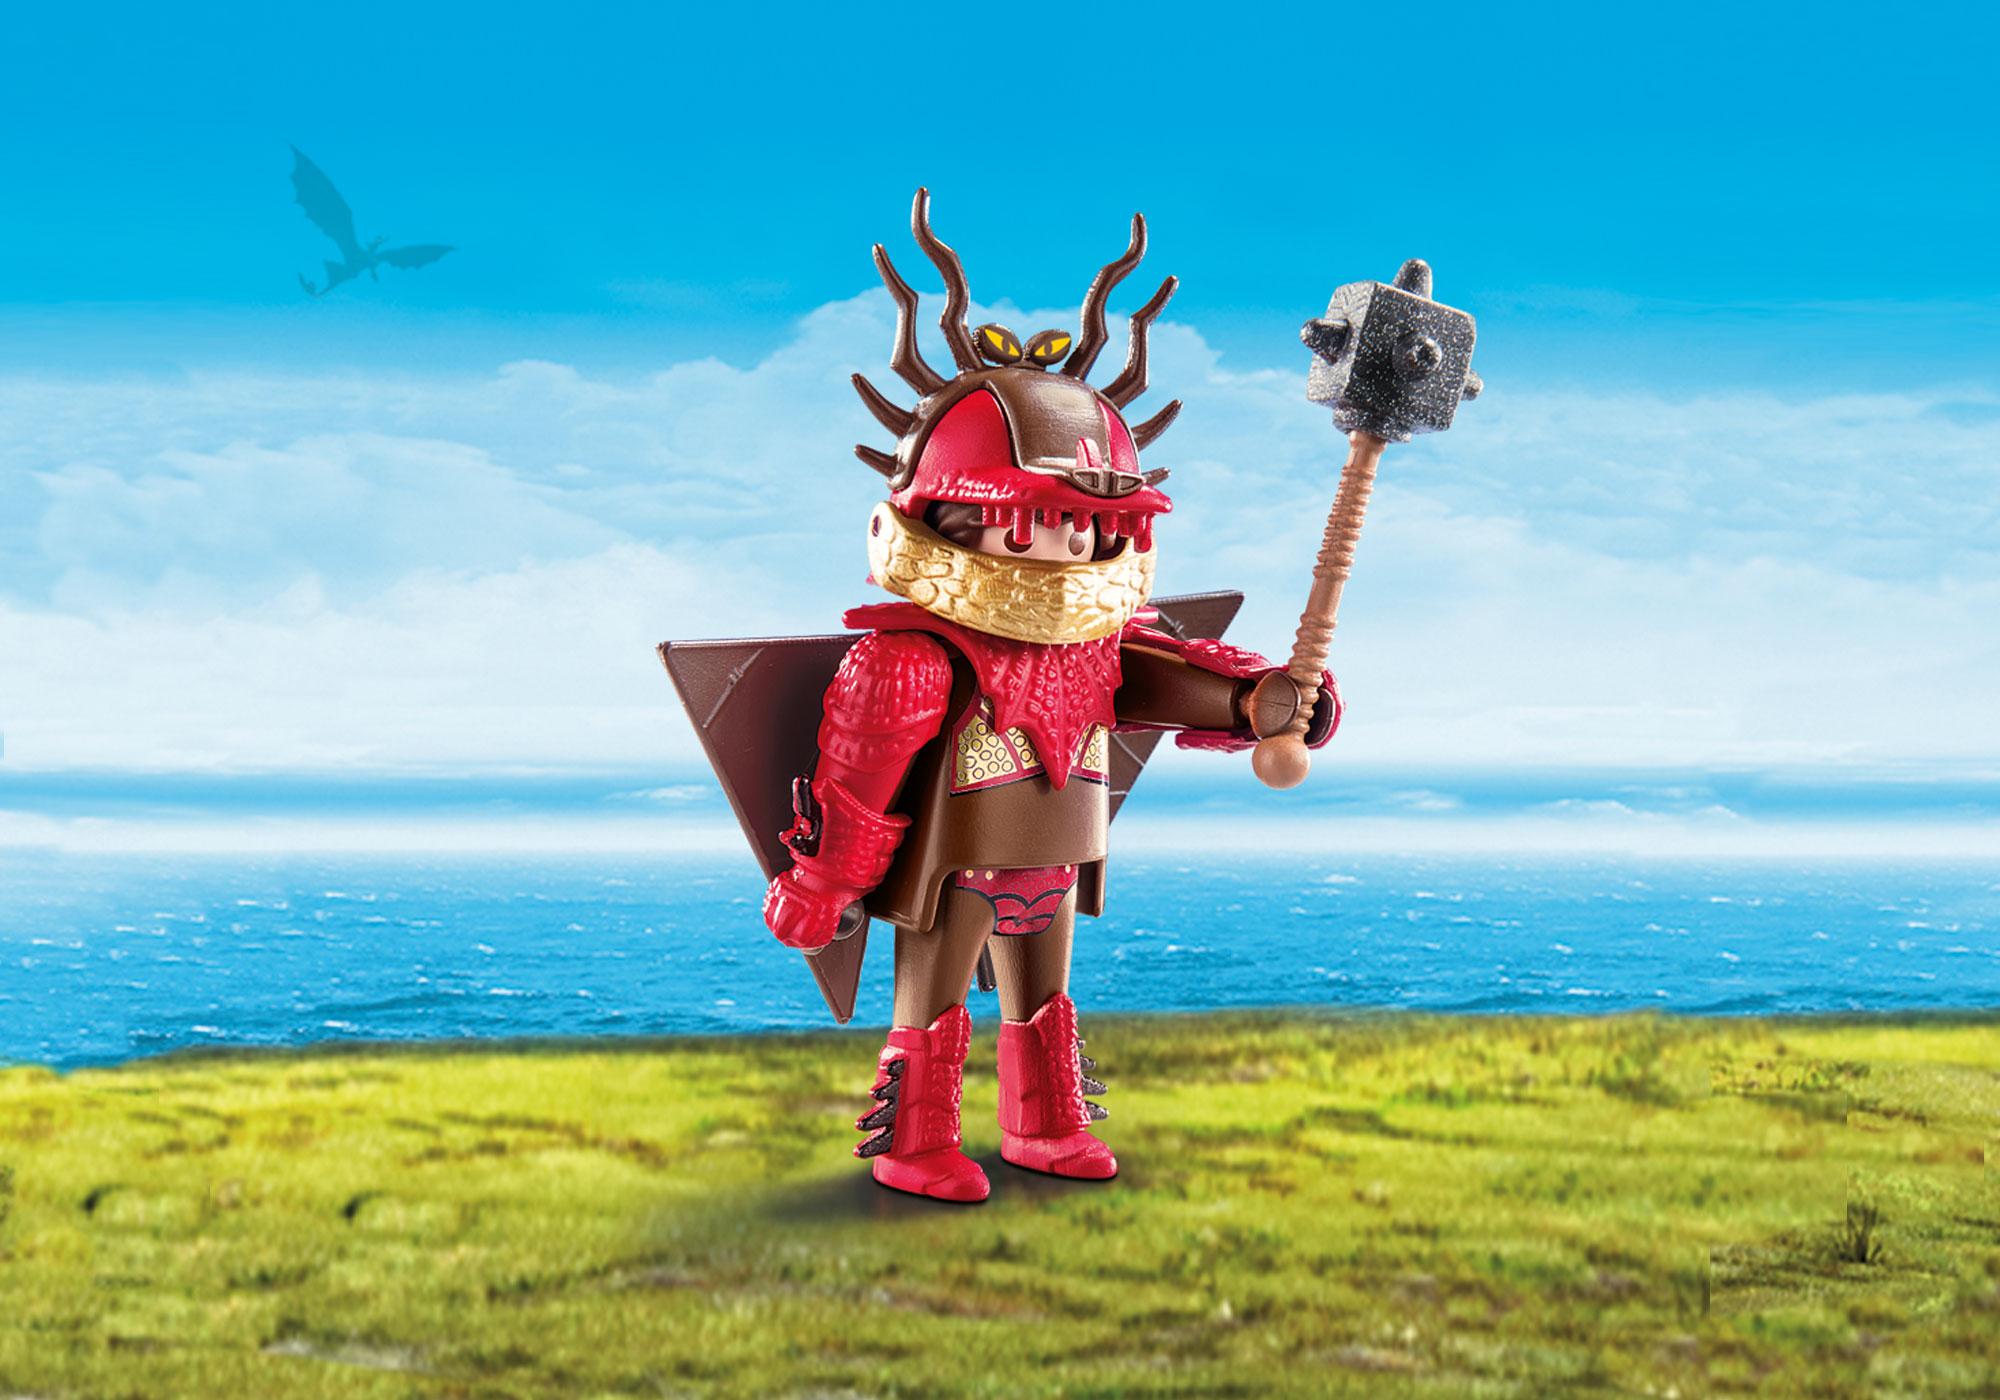 dragons race to the edge playmobil